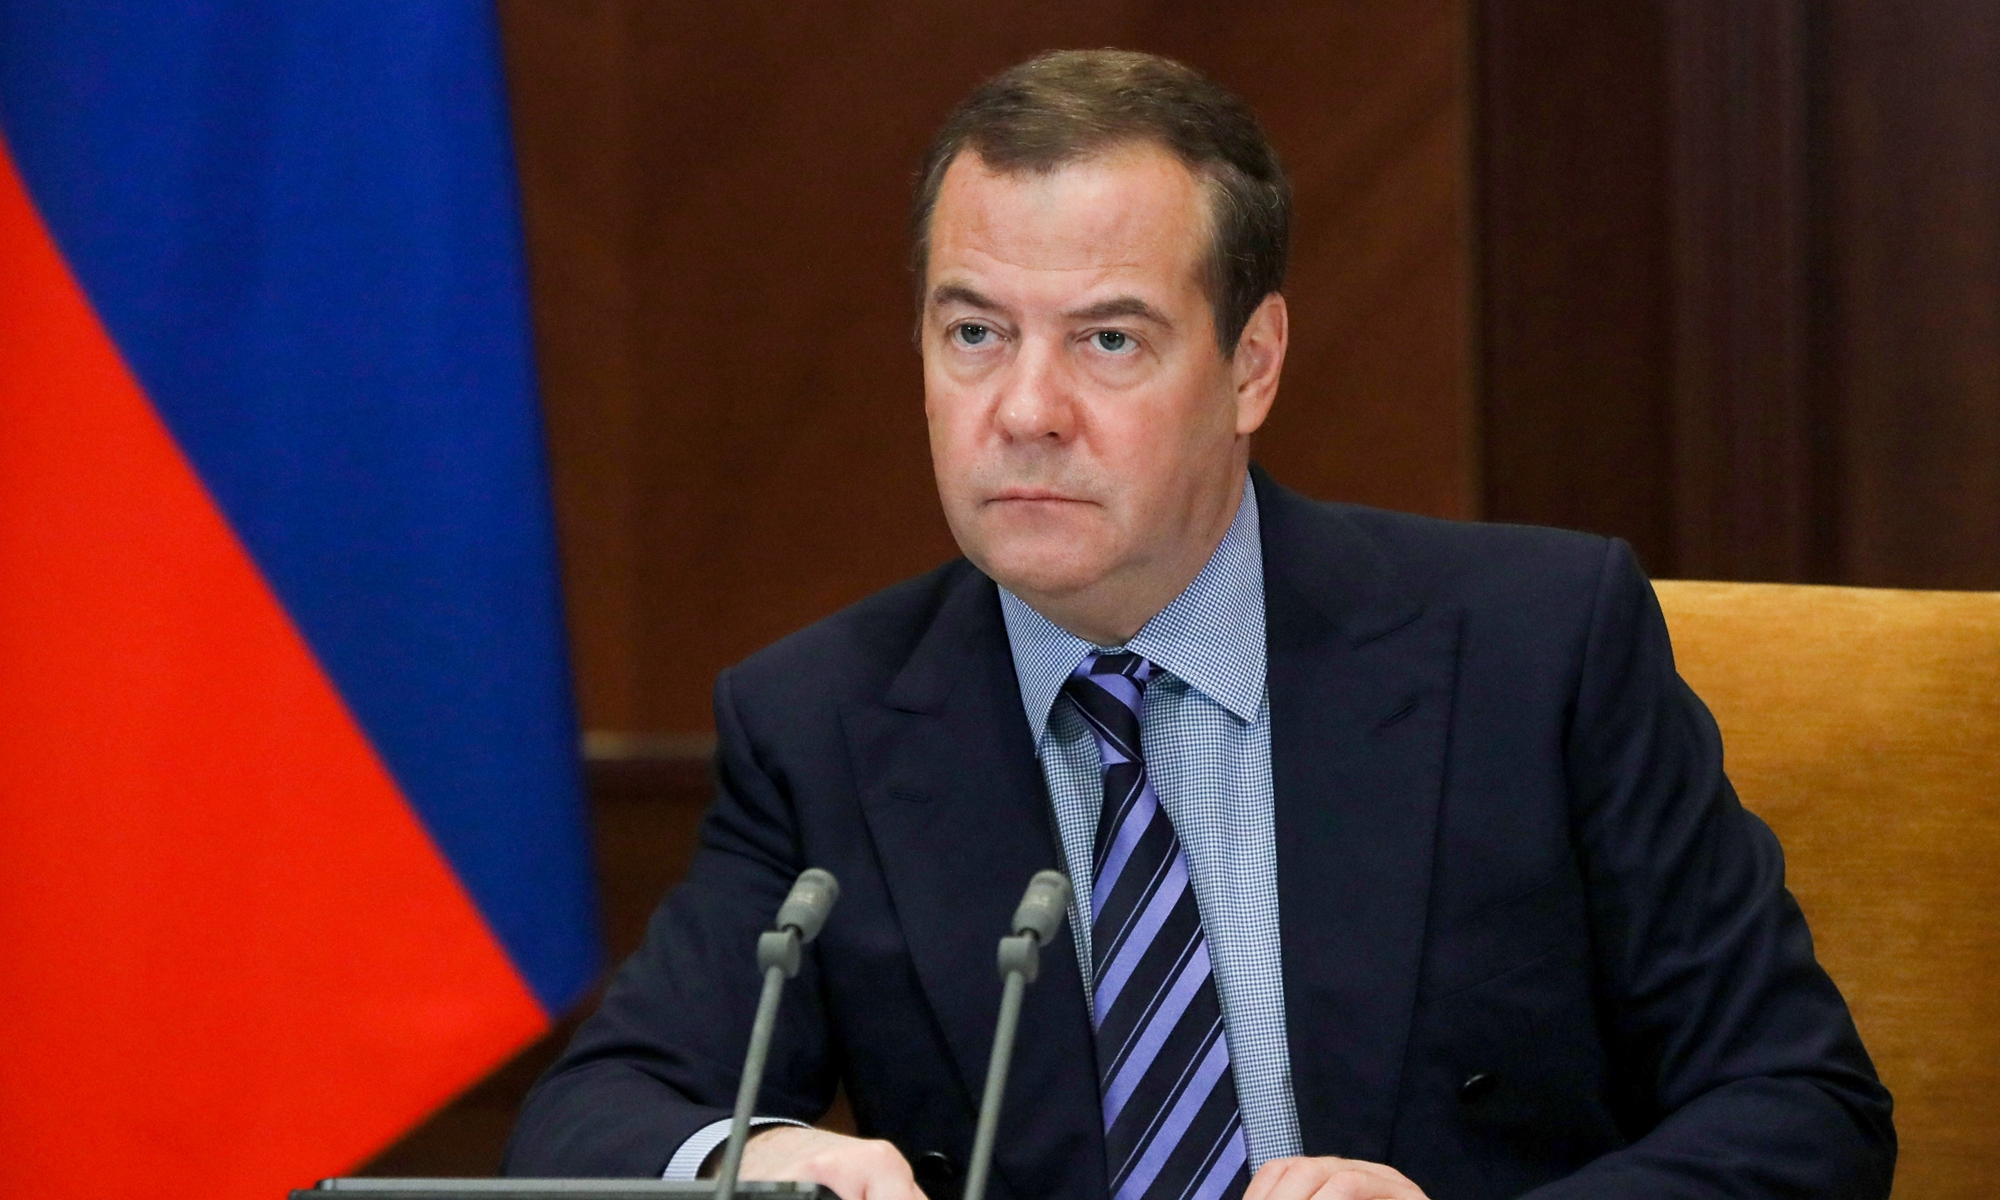 Deputy Chairman of the Russian Security Council Dmitry Medvedev. Photo:VCG